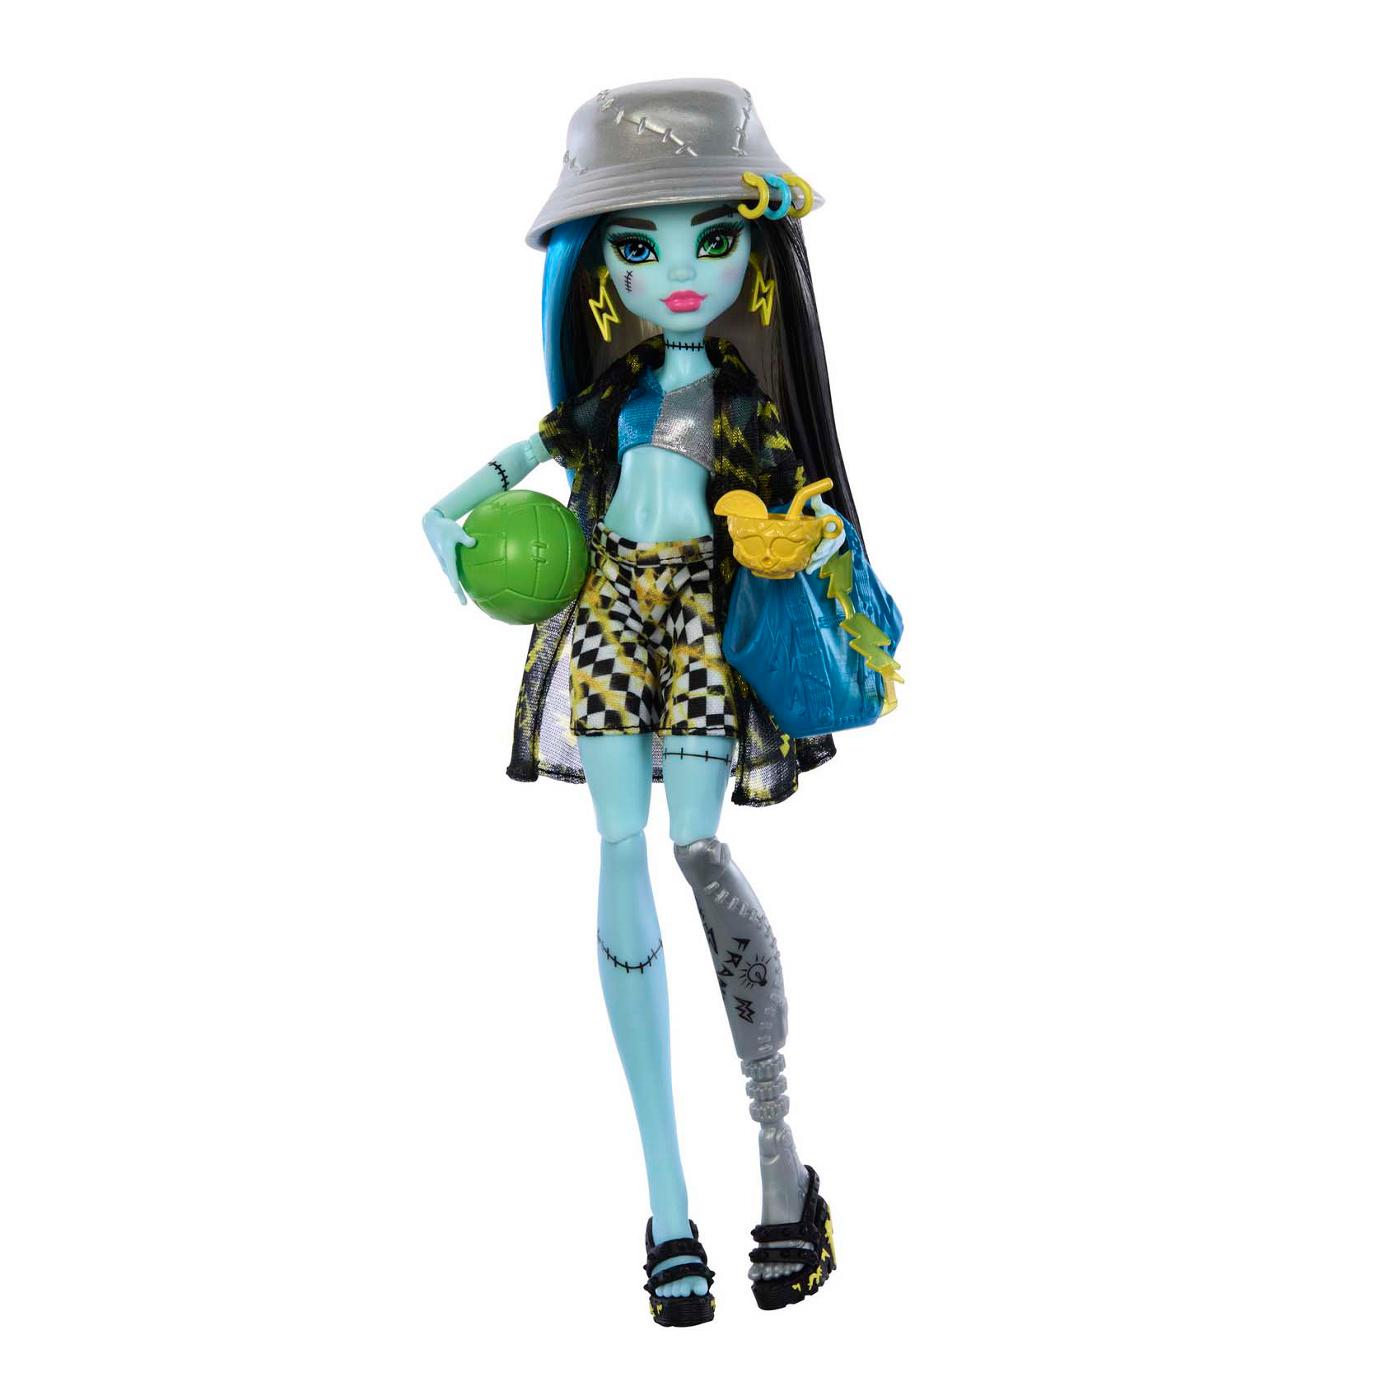 Monster High Scare-Adise Island Frankie Stein Fashion Doll; image 1 of 2